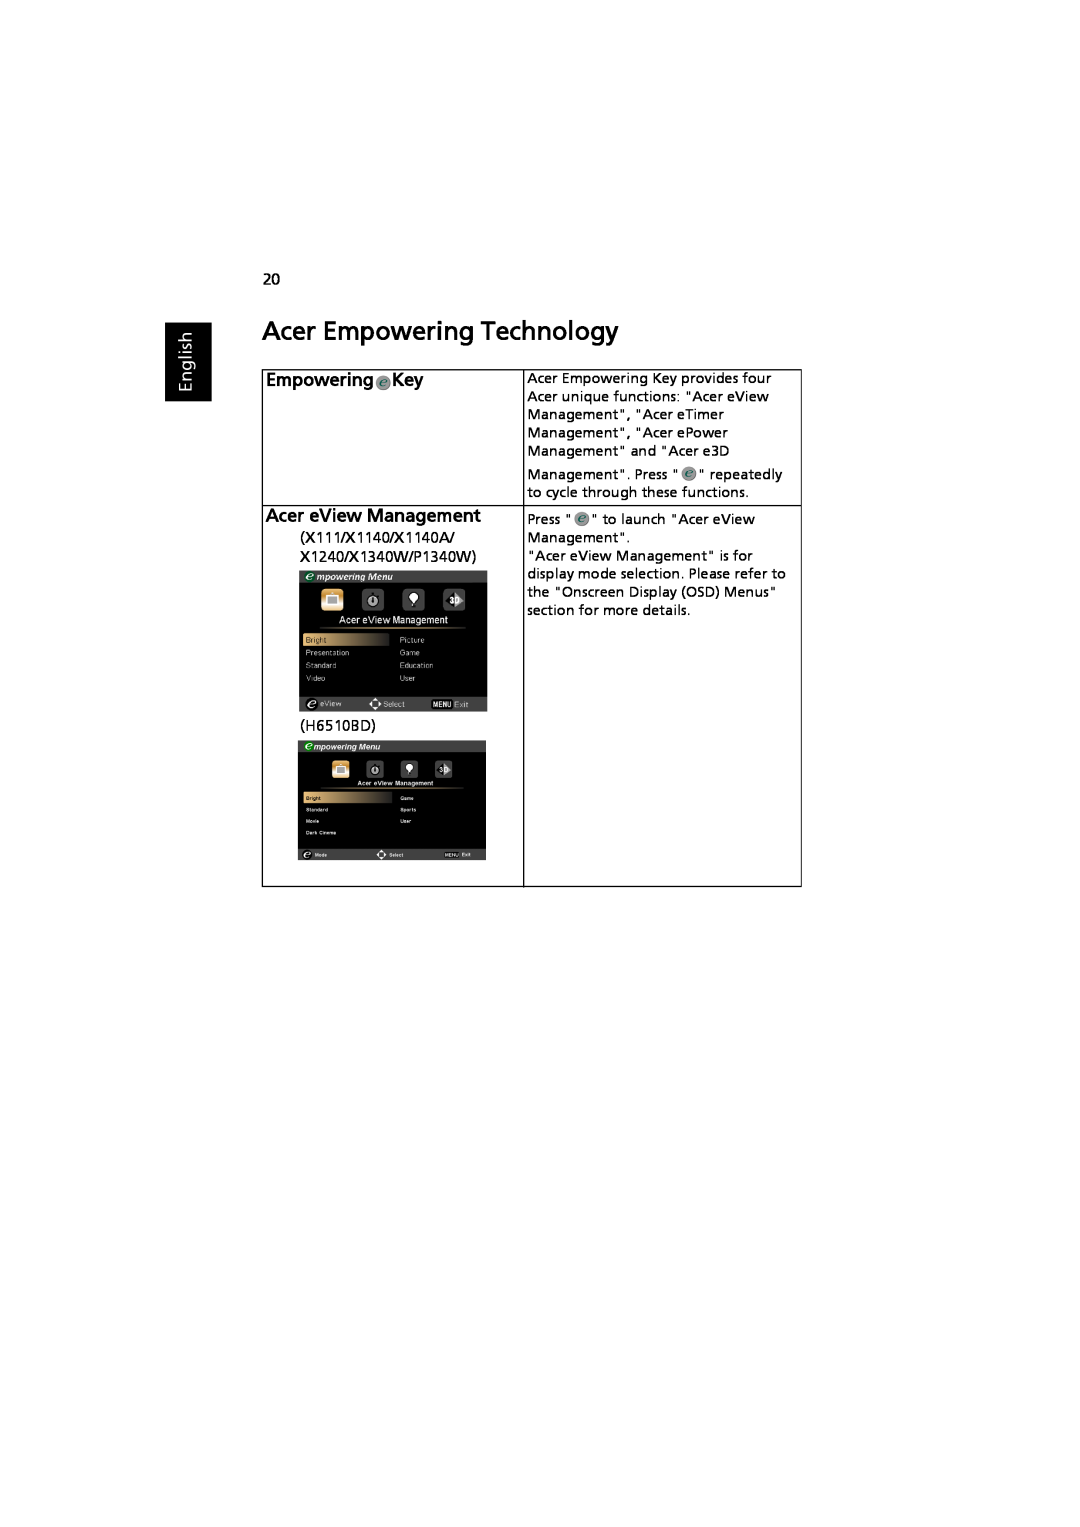 Acer MRJFZ1100A manual Acer Empowering Technology, Empowering Key, Acer eView Management, English 